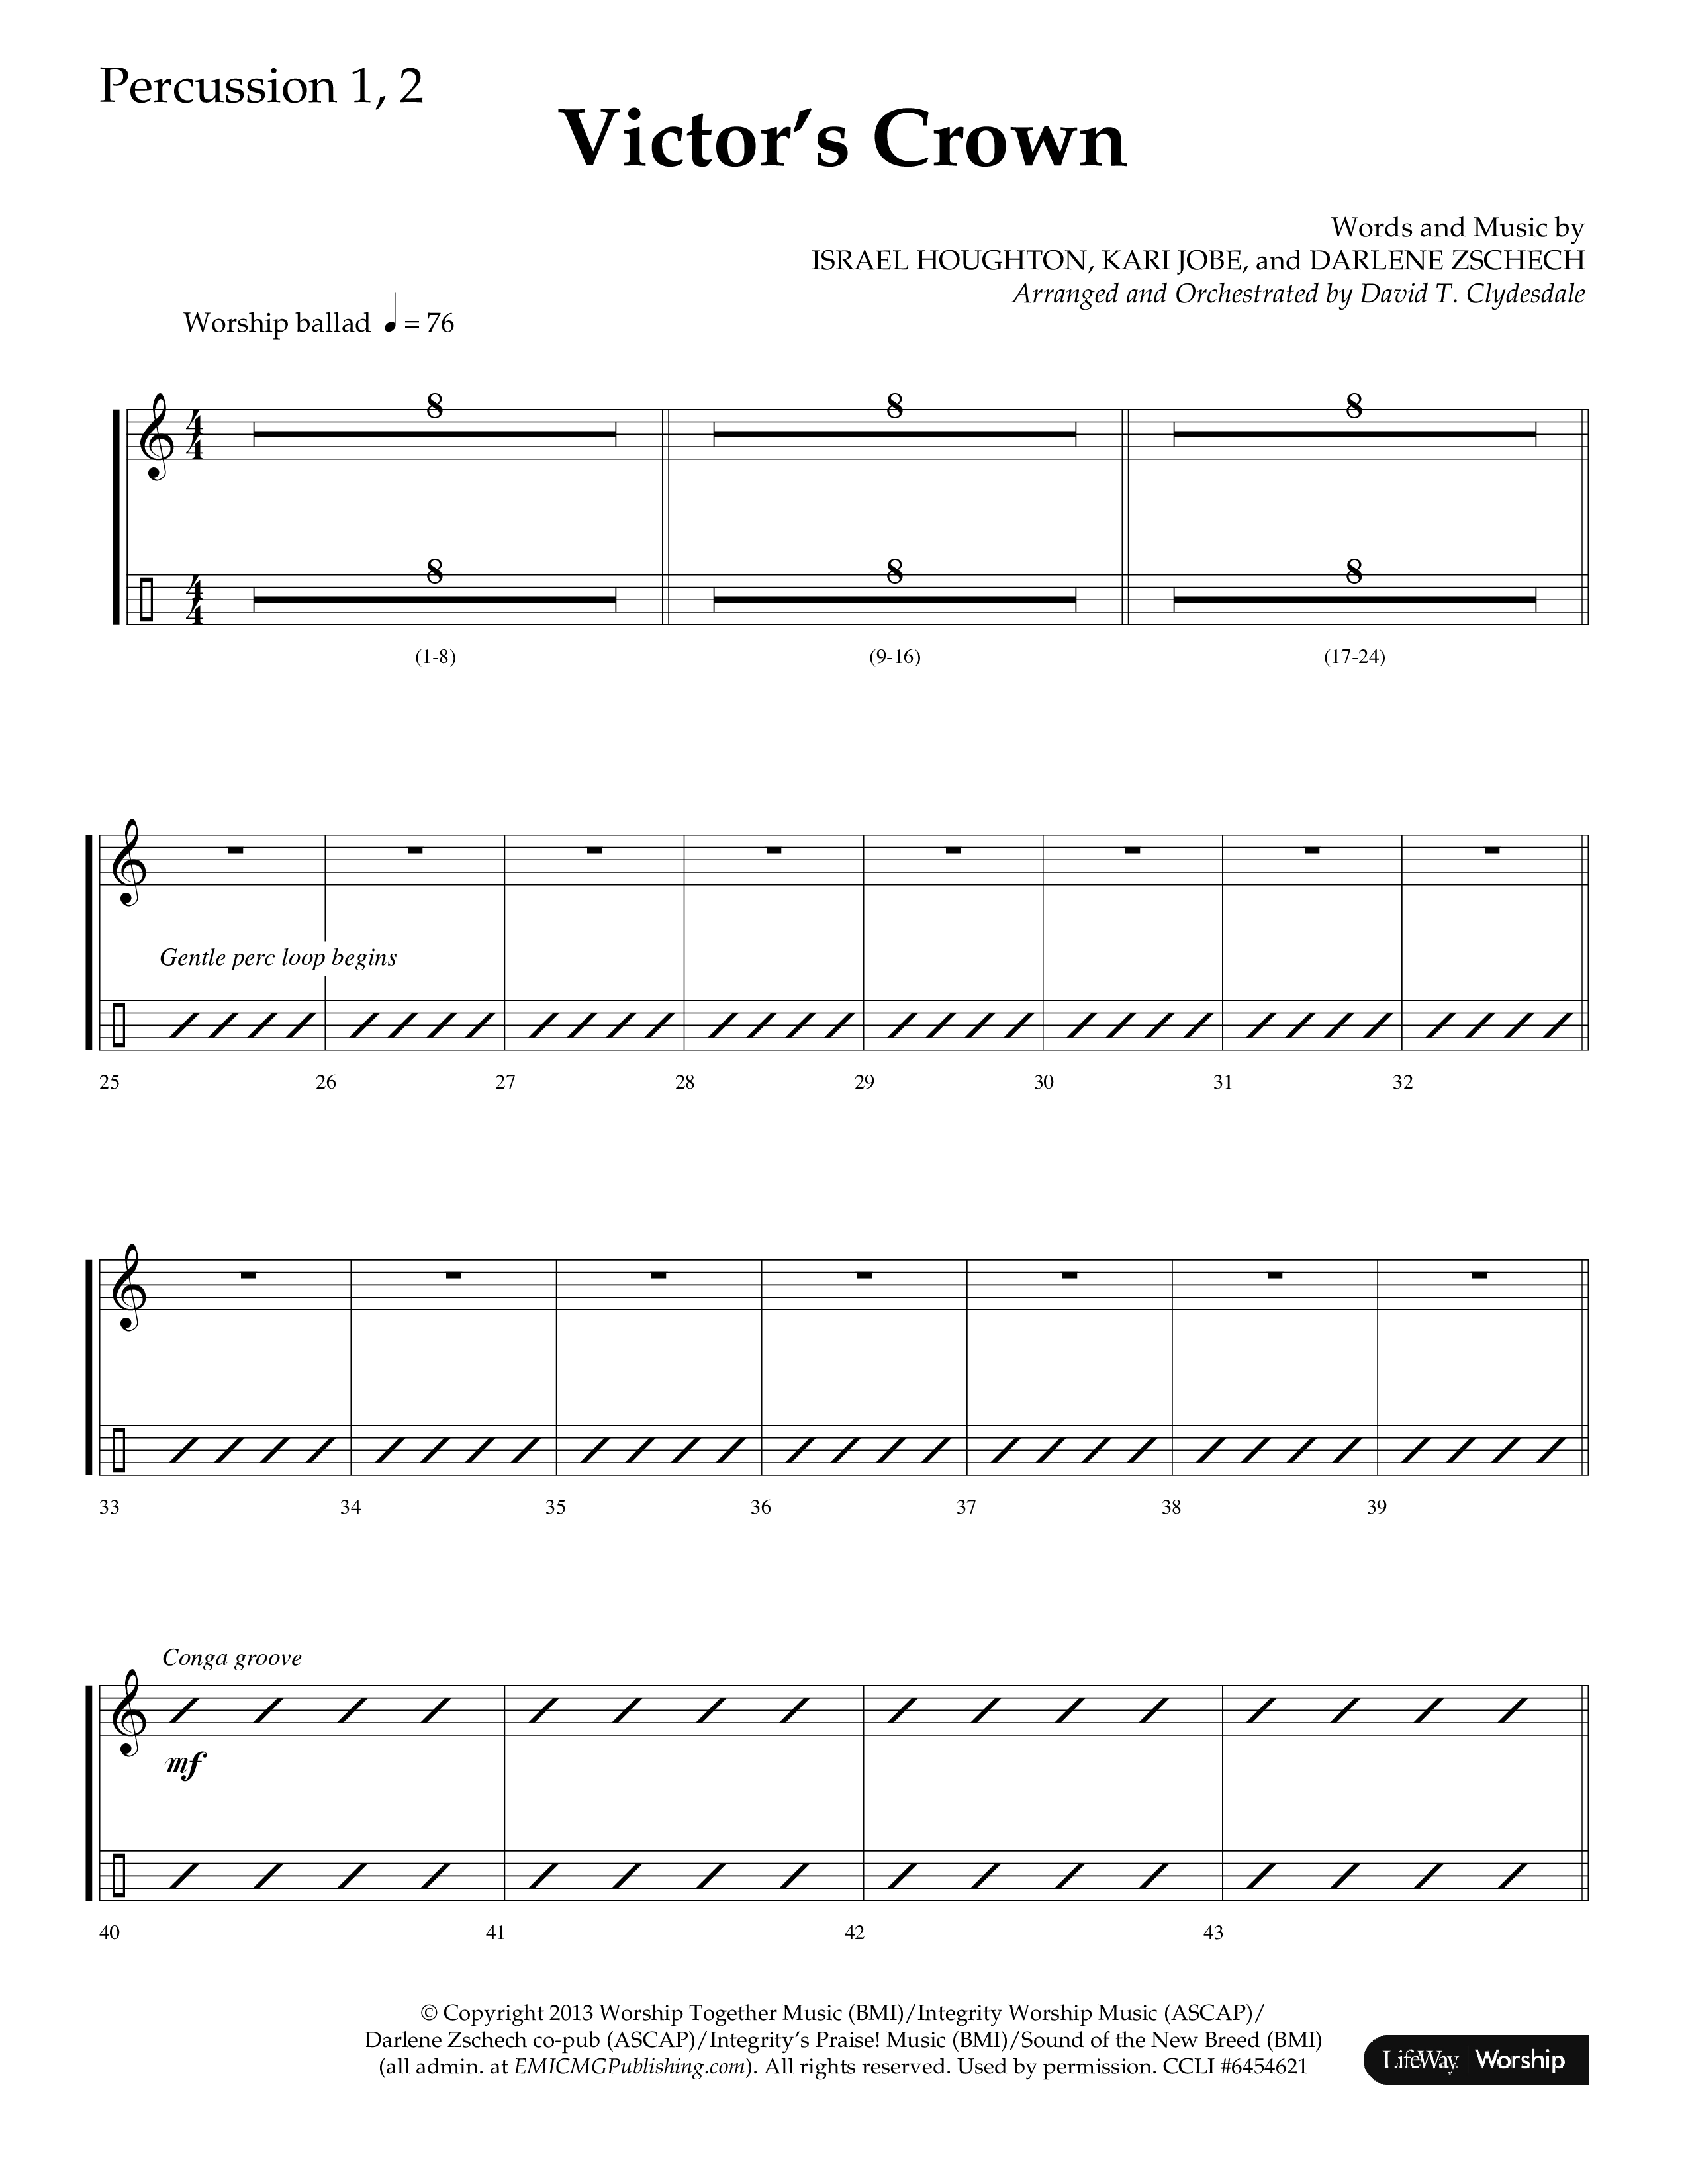 Victor's Crown (Choral Anthem SATB) Percussion 1/2 (Lifeway Choral / Arr. David T. Clydesdale)